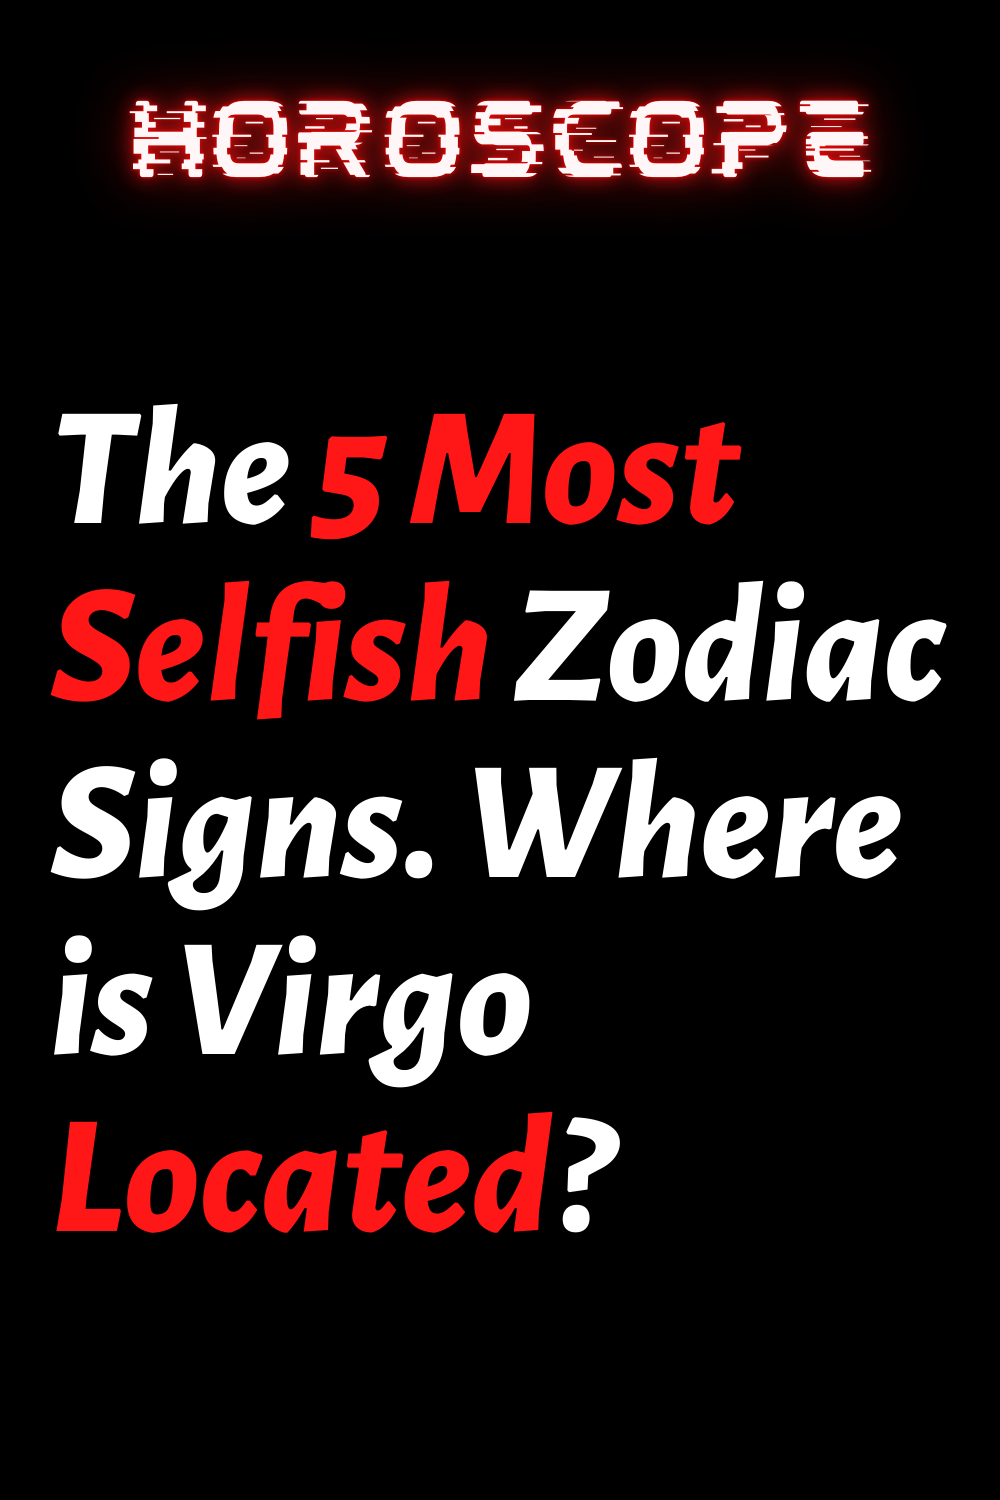 The 5 Most Selfish Zodiac Signs. Where is Virgo Located? – ShineFeeds